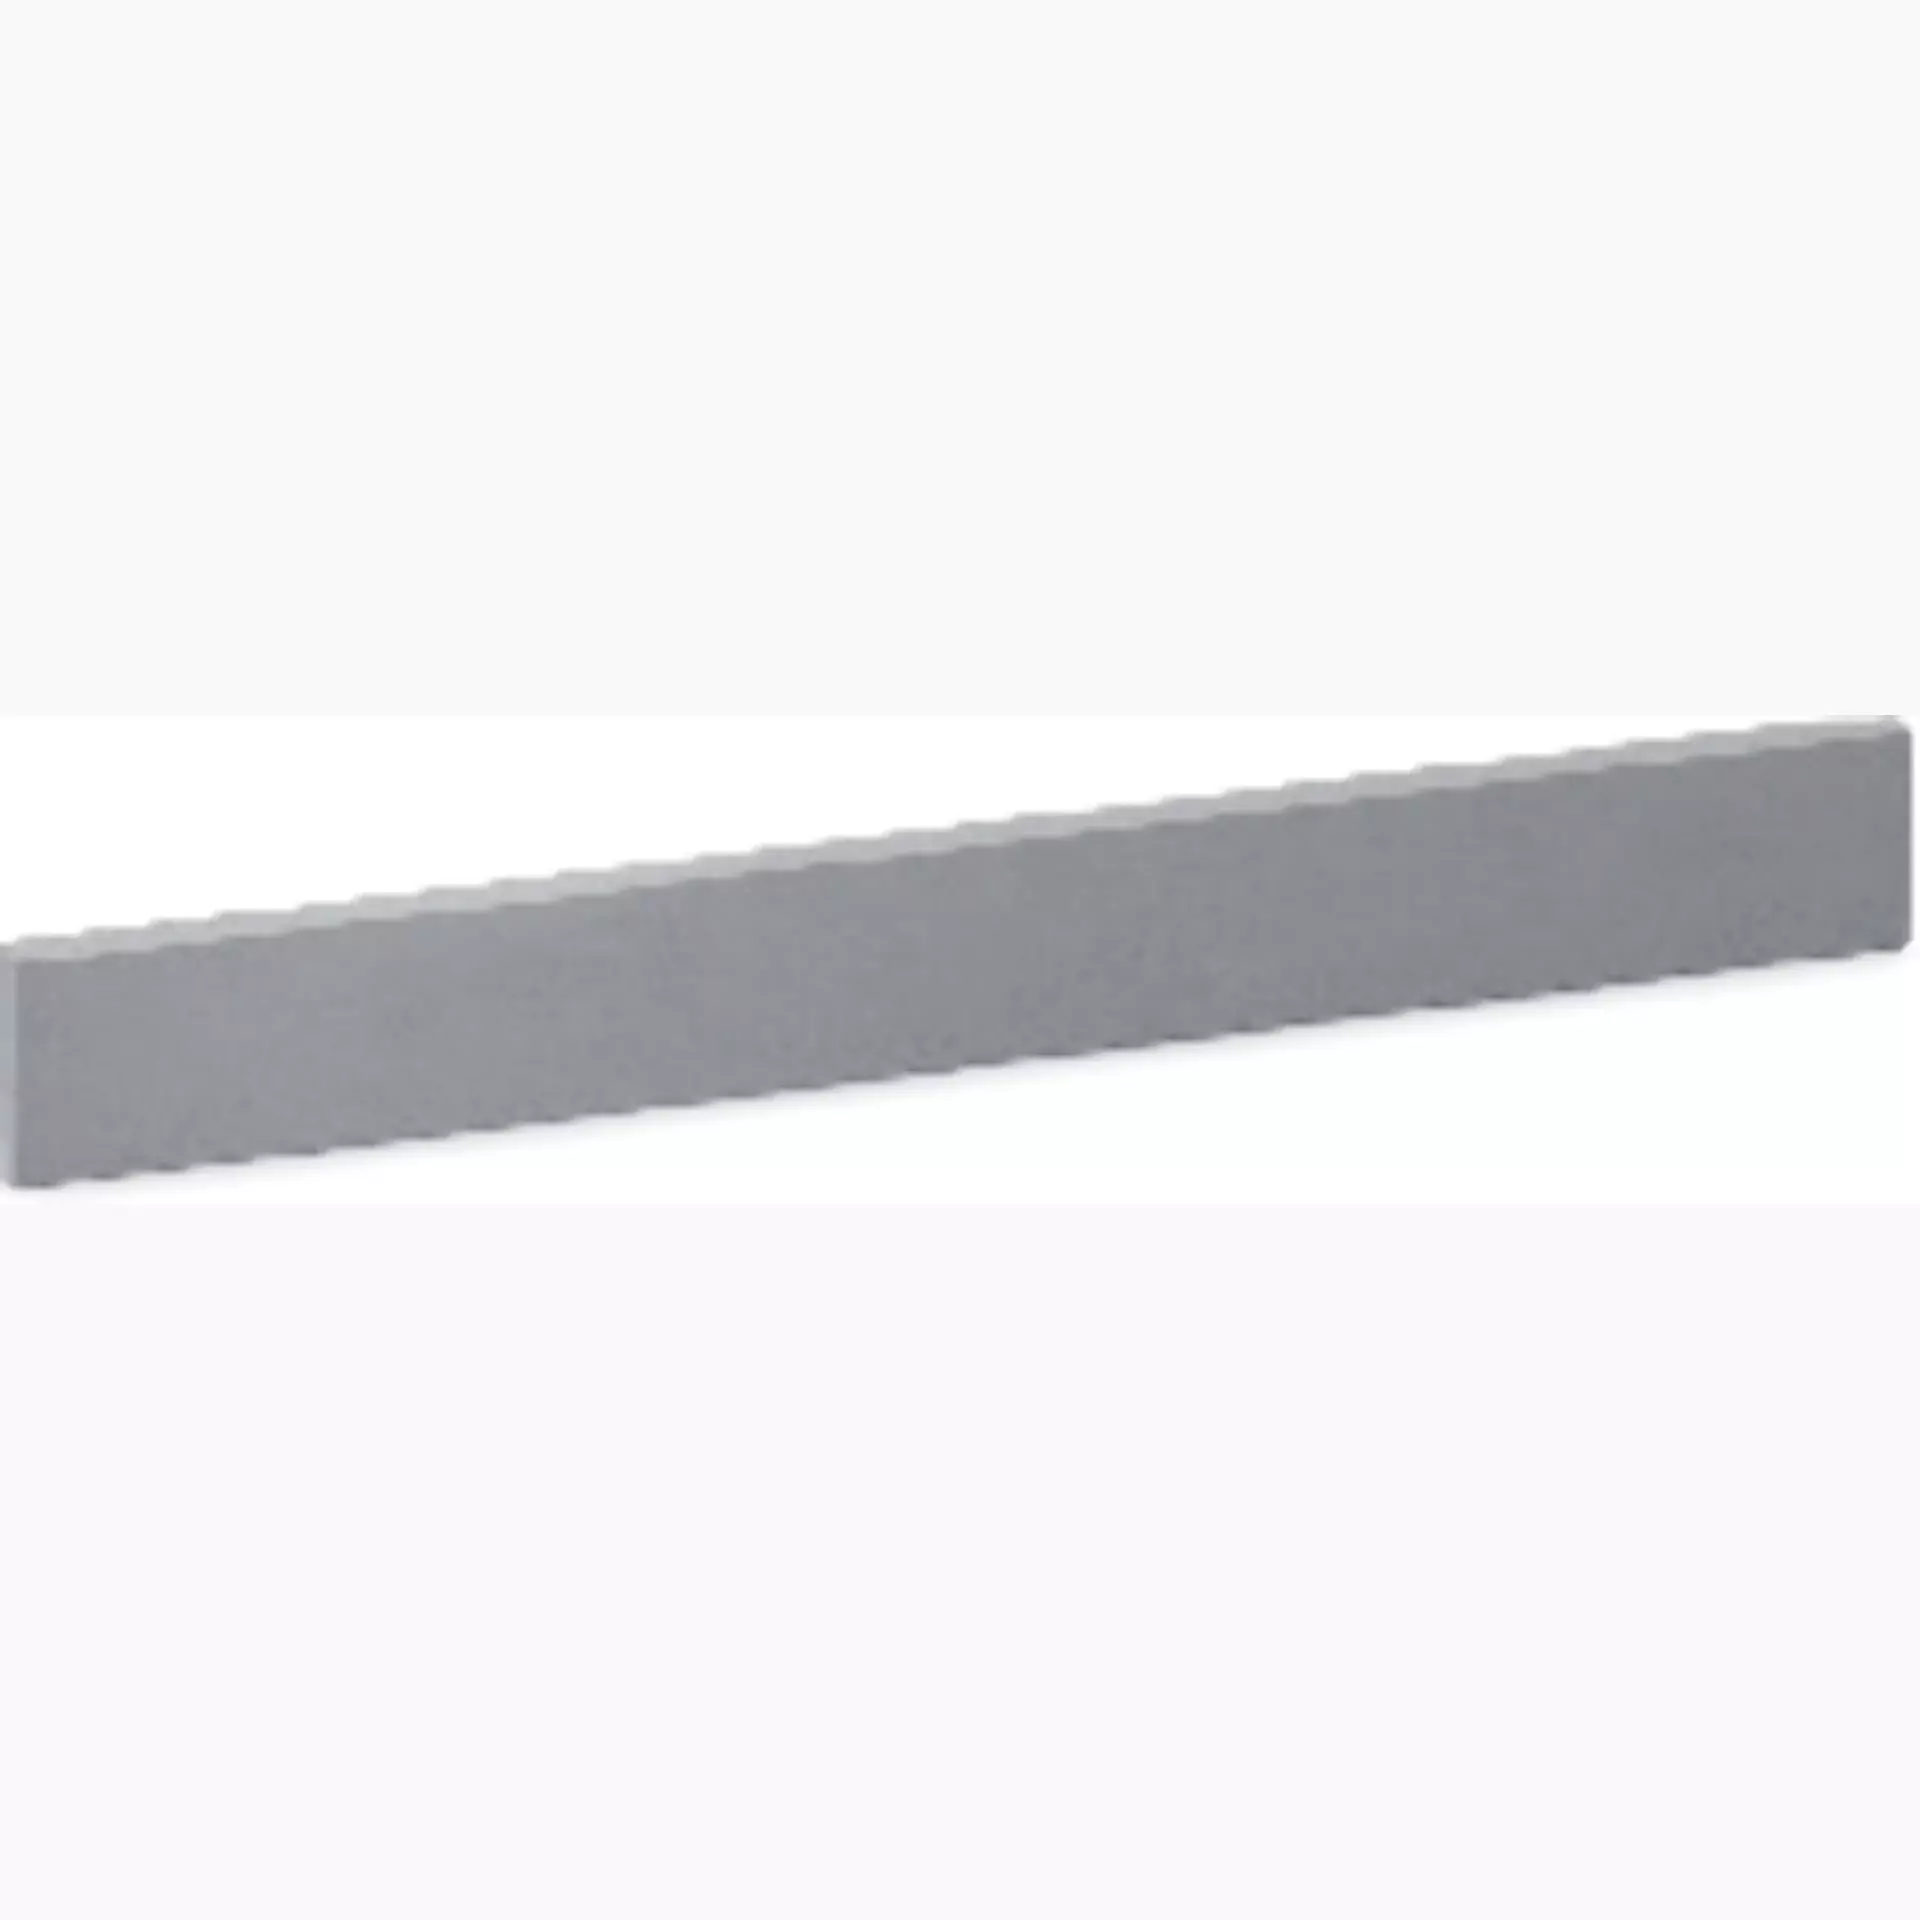 Sichenia Space Taupe Skirting board 0177856 7x60cm rectified 10mm